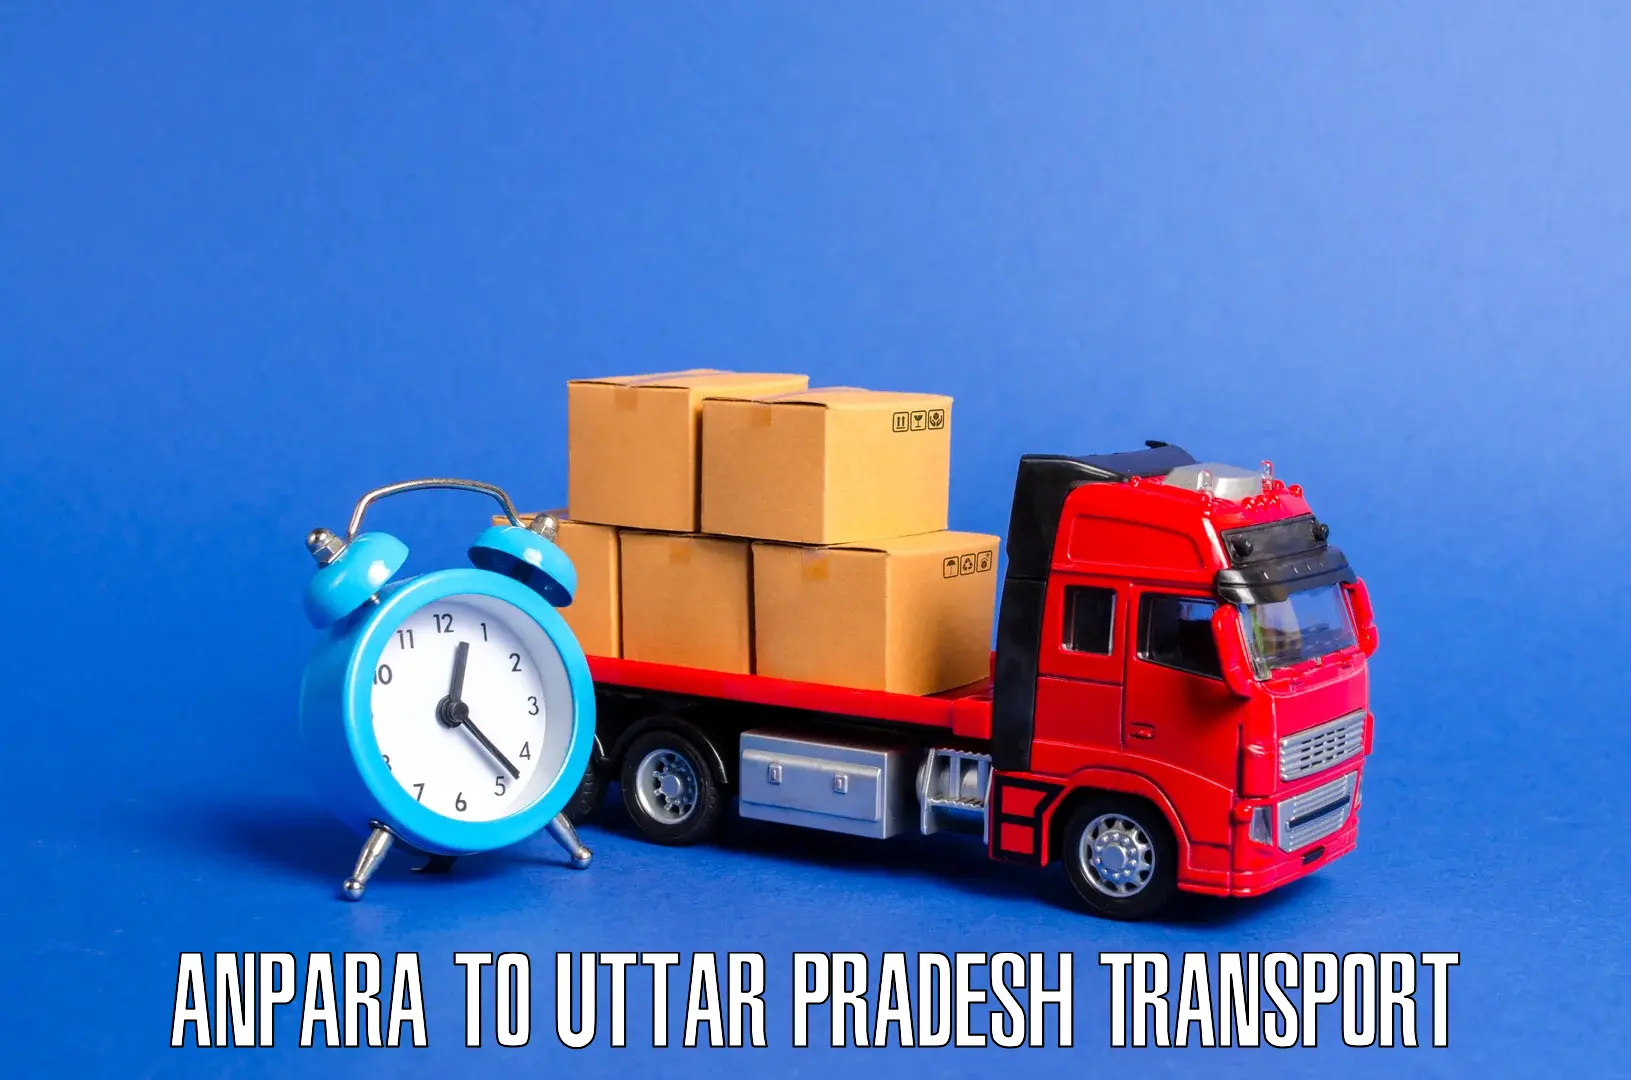 Daily parcel service transport Anpara to Malihabad